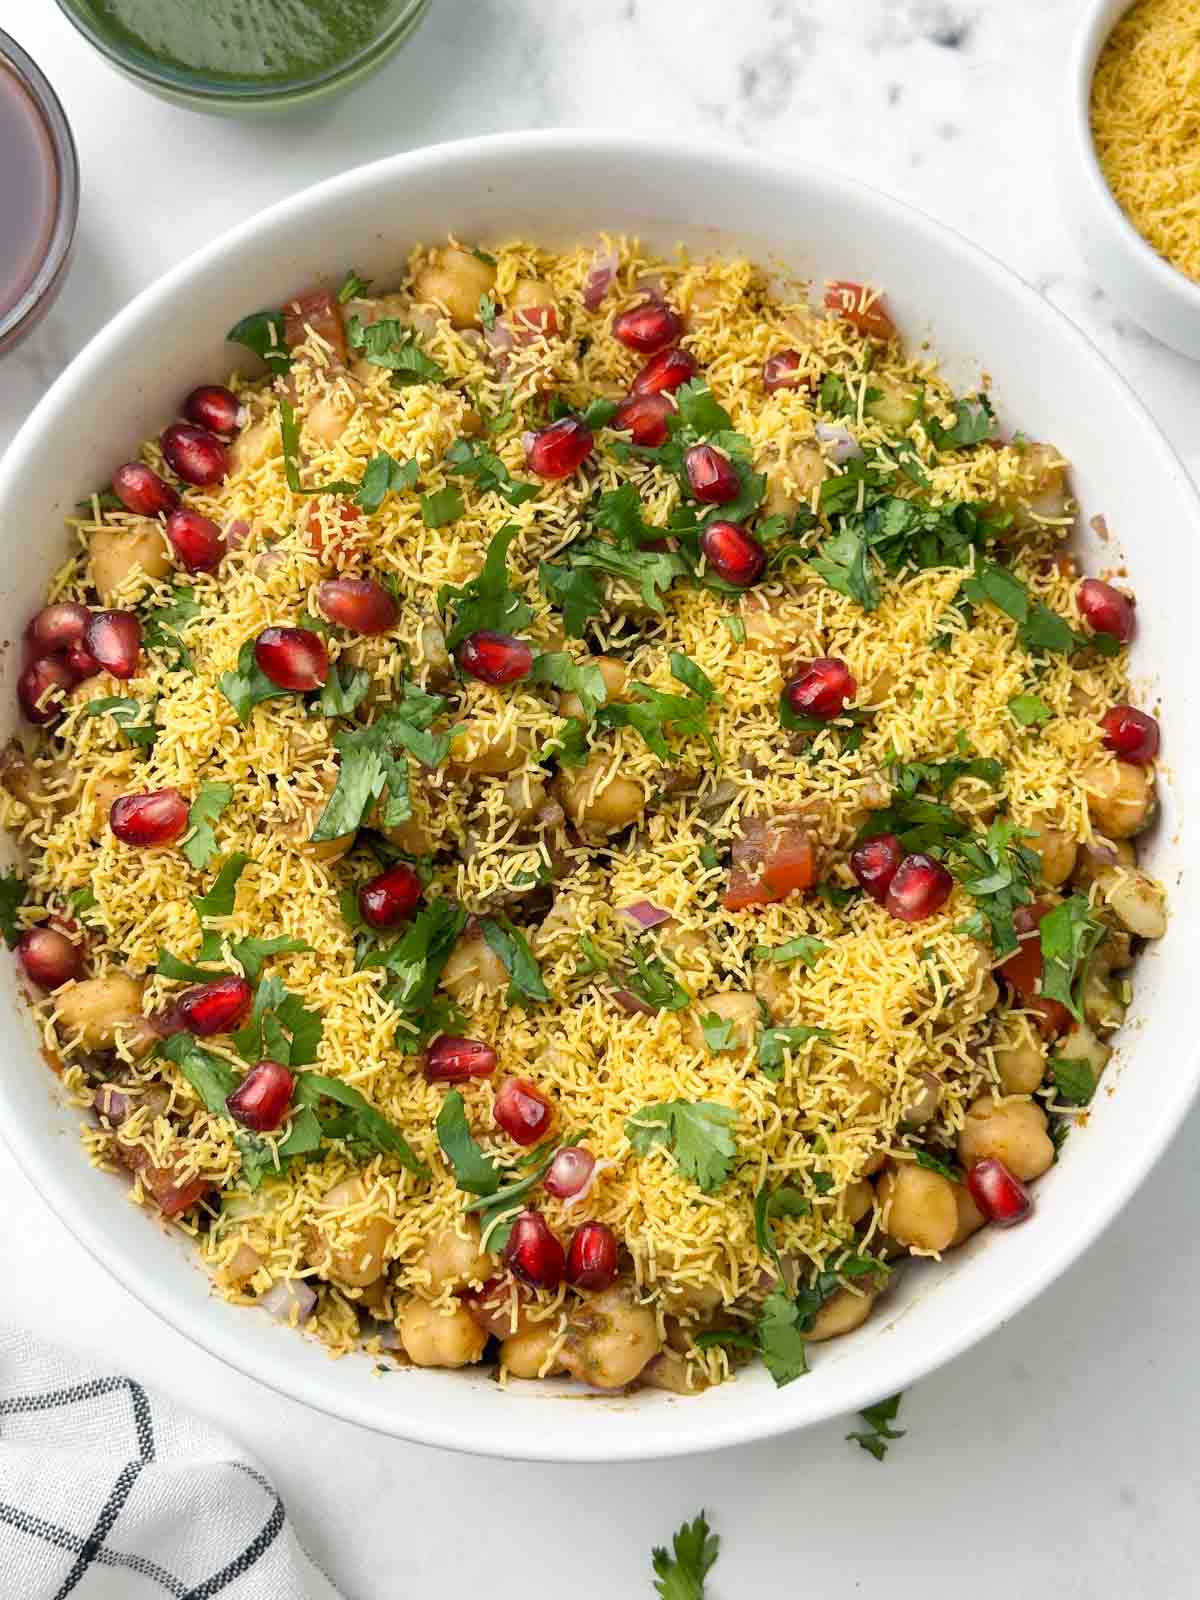 chana chaat served in a bowl and chutneys and sev on the side